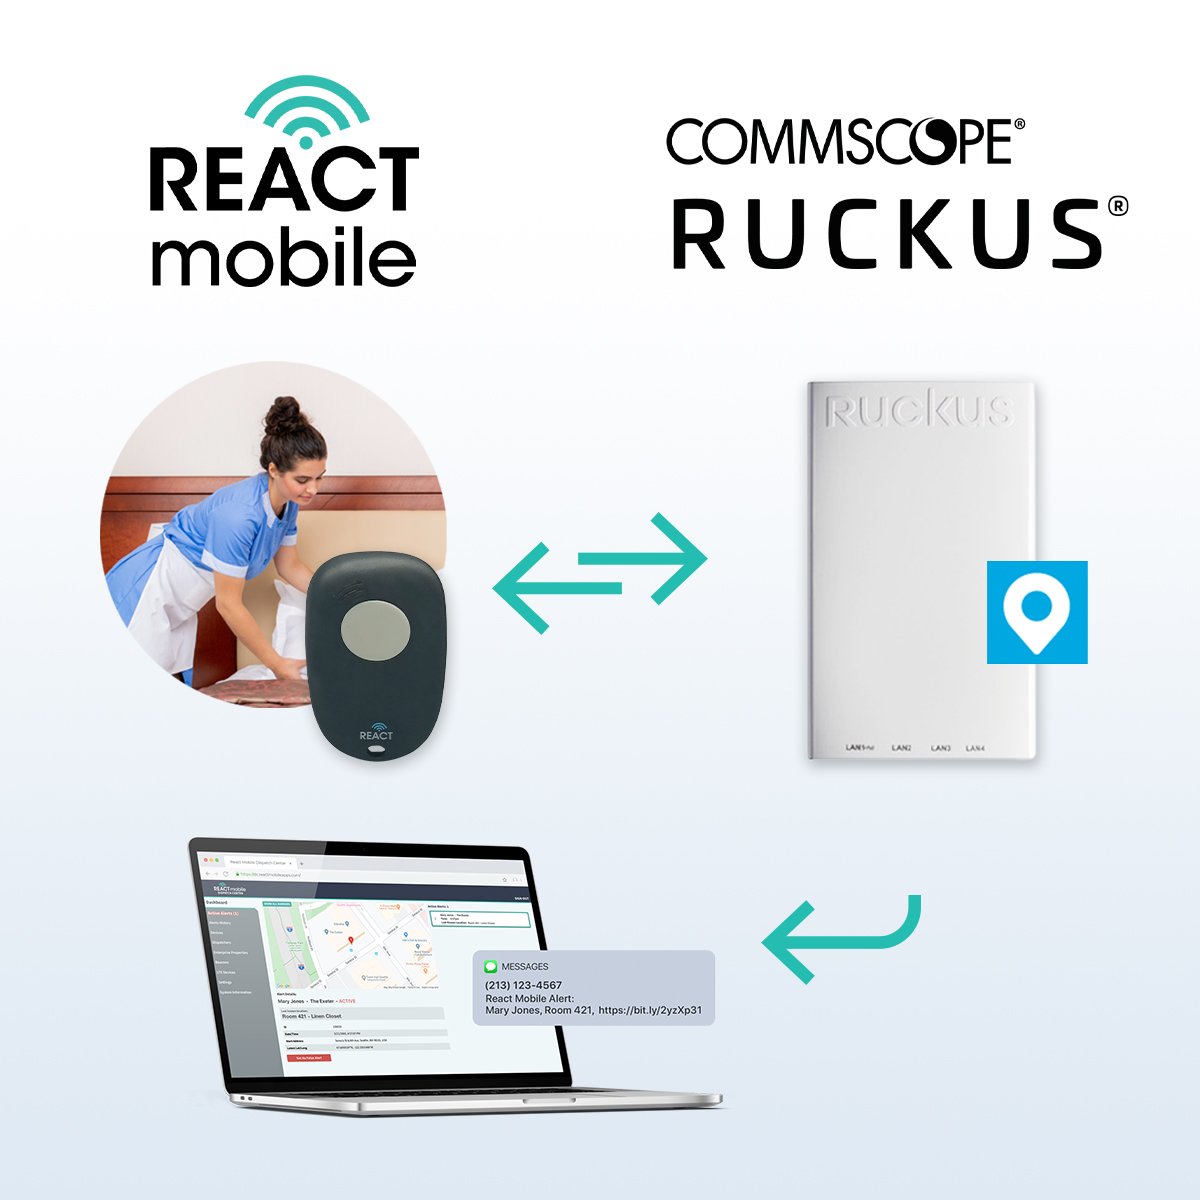 commscope ruckus and react mobile integration